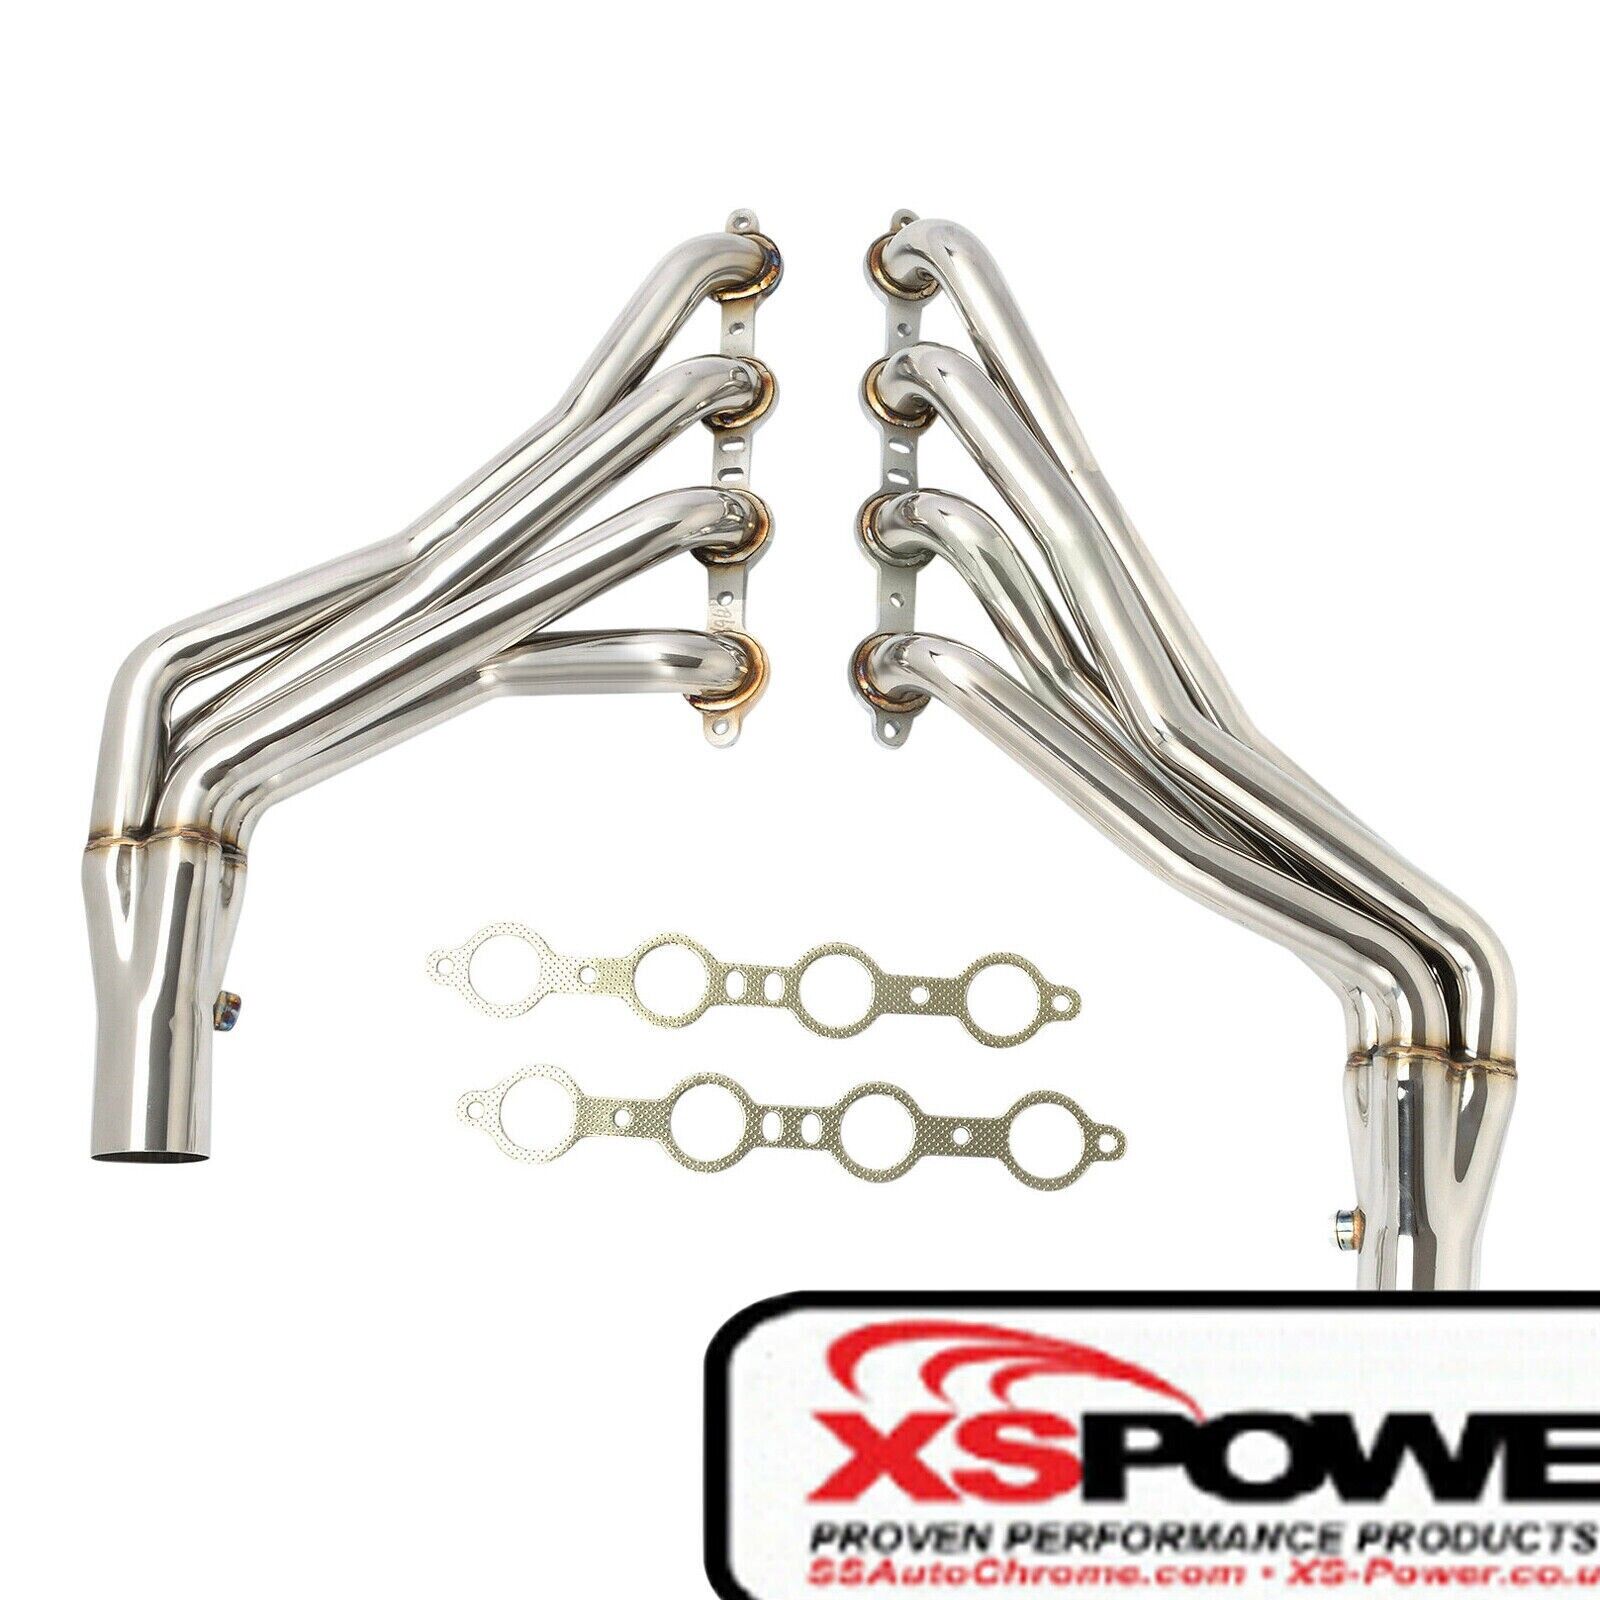 Long Tube Headers 1999-2006 for Chevy Silverado Sierra 4.8L 5.3L LS ONE AND 7/8